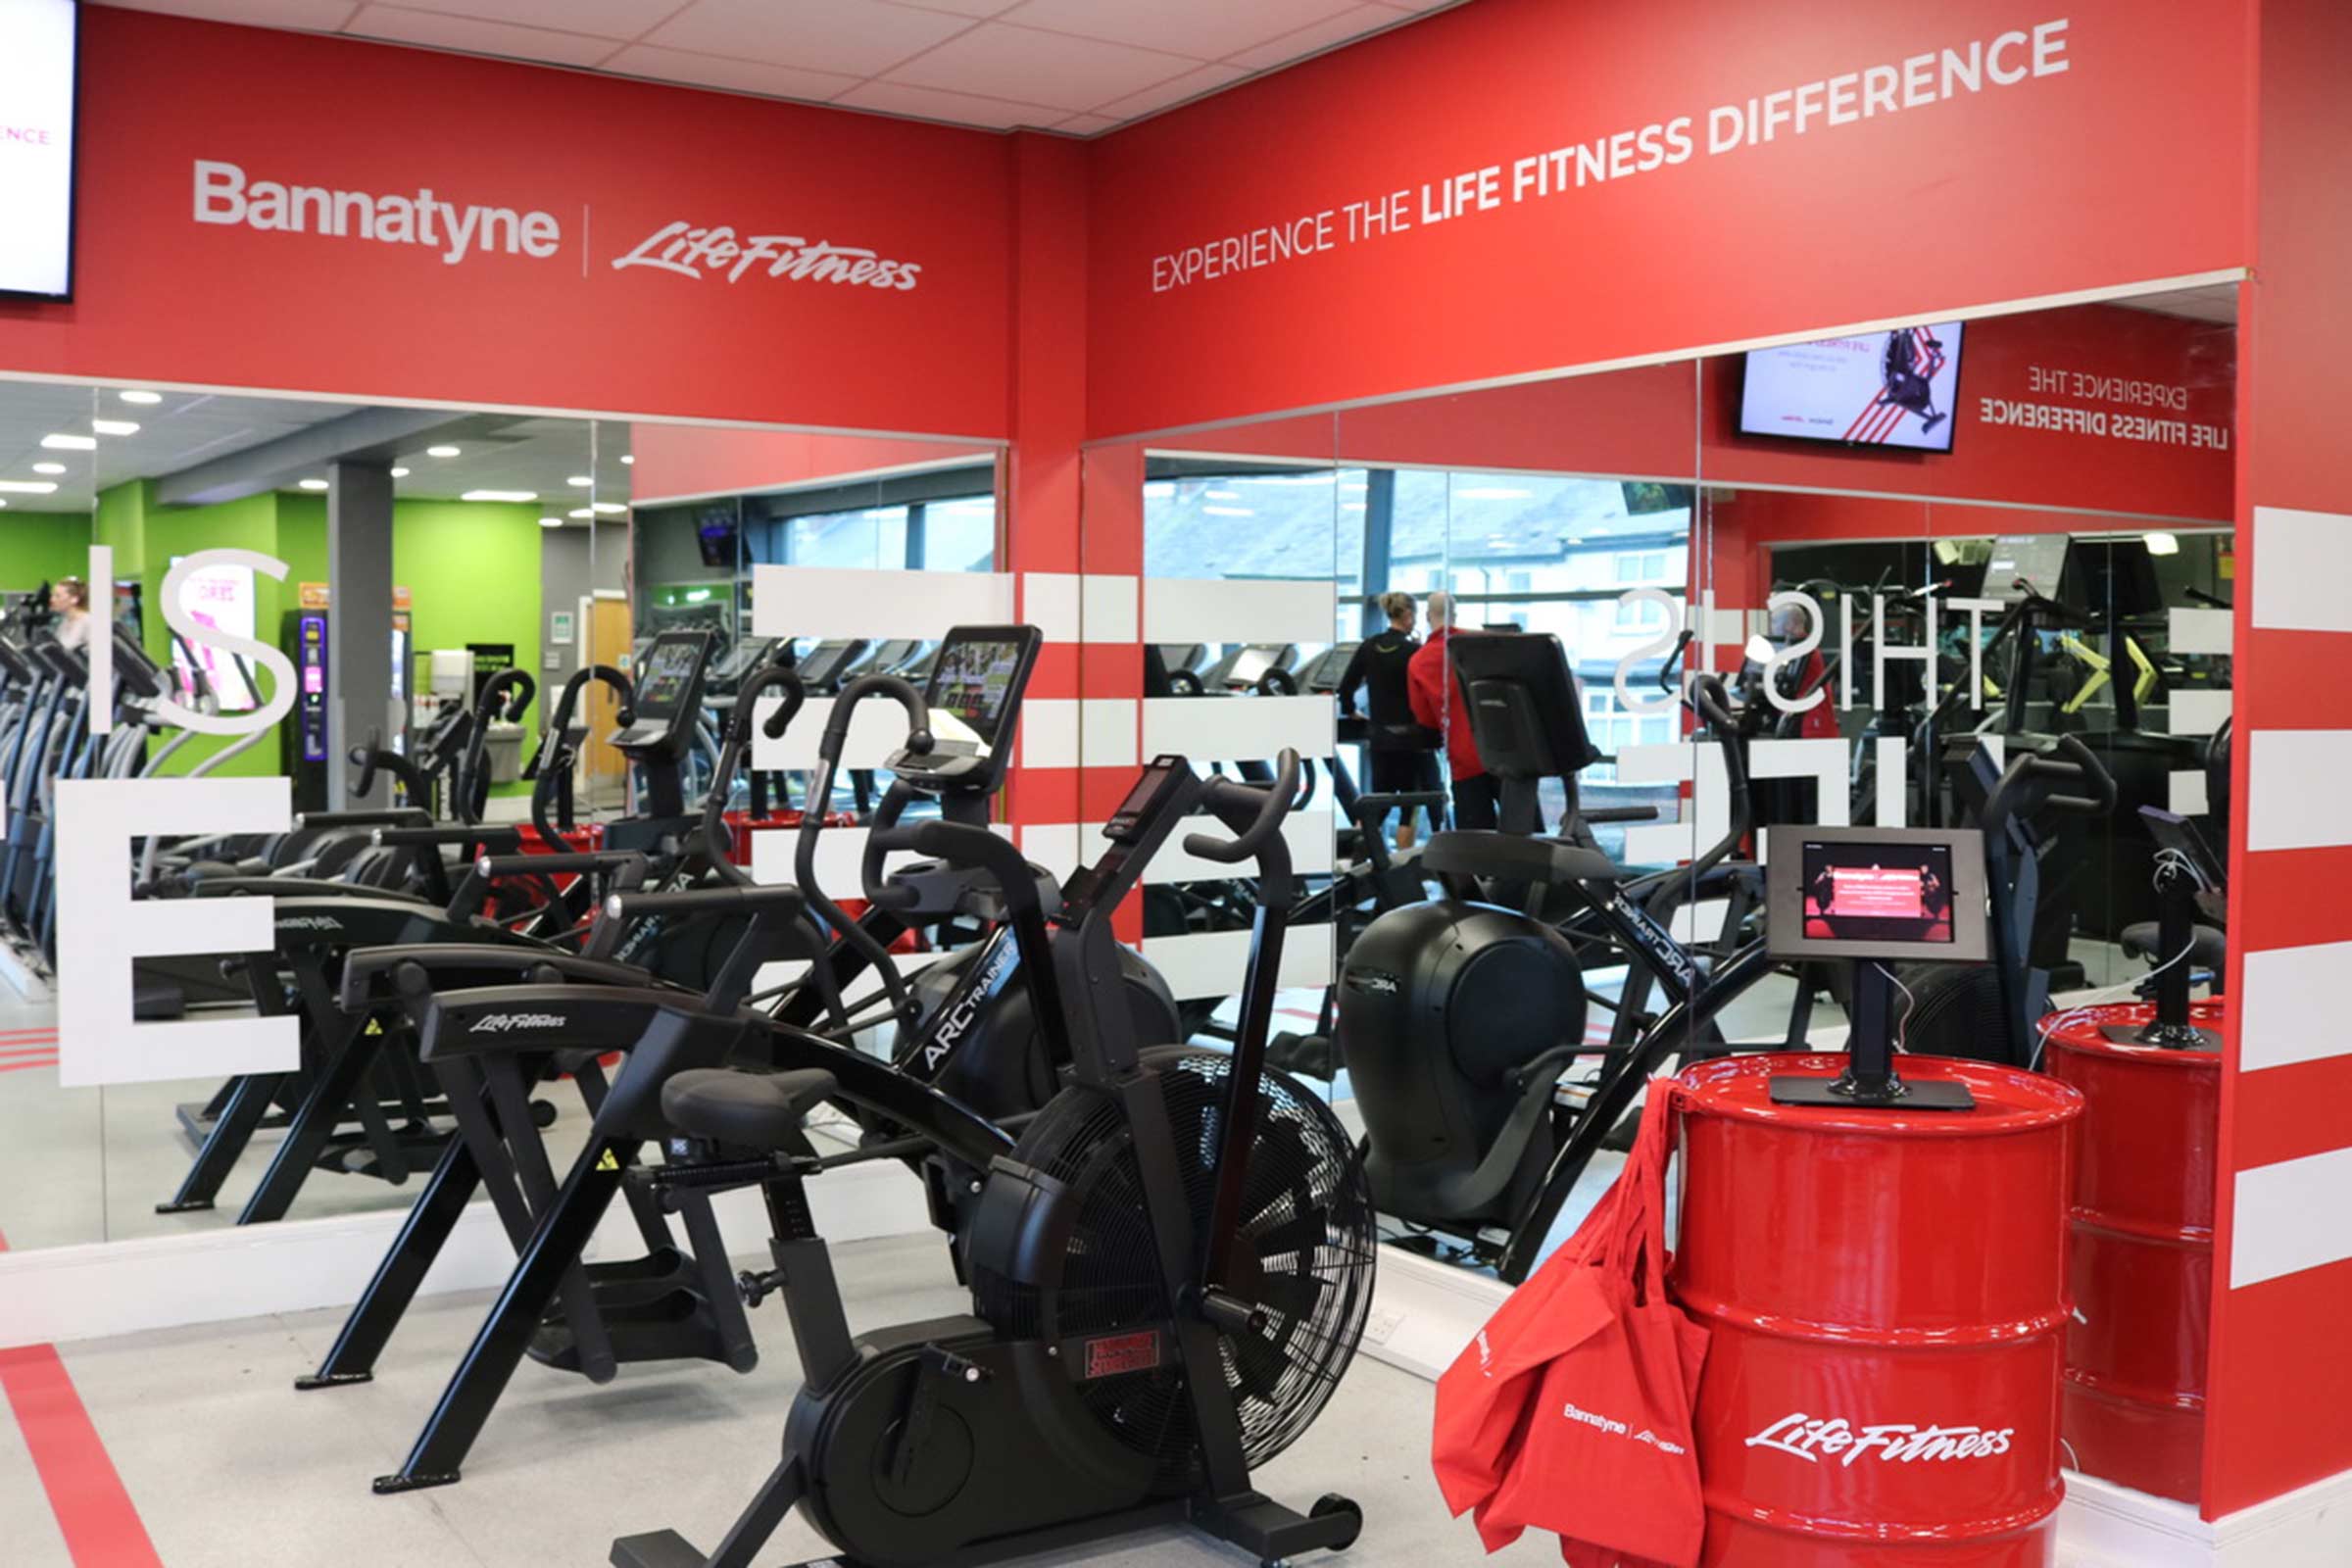 Bringing to life the ‘Life Fitness Difference’ at Bannatyne Health Club  